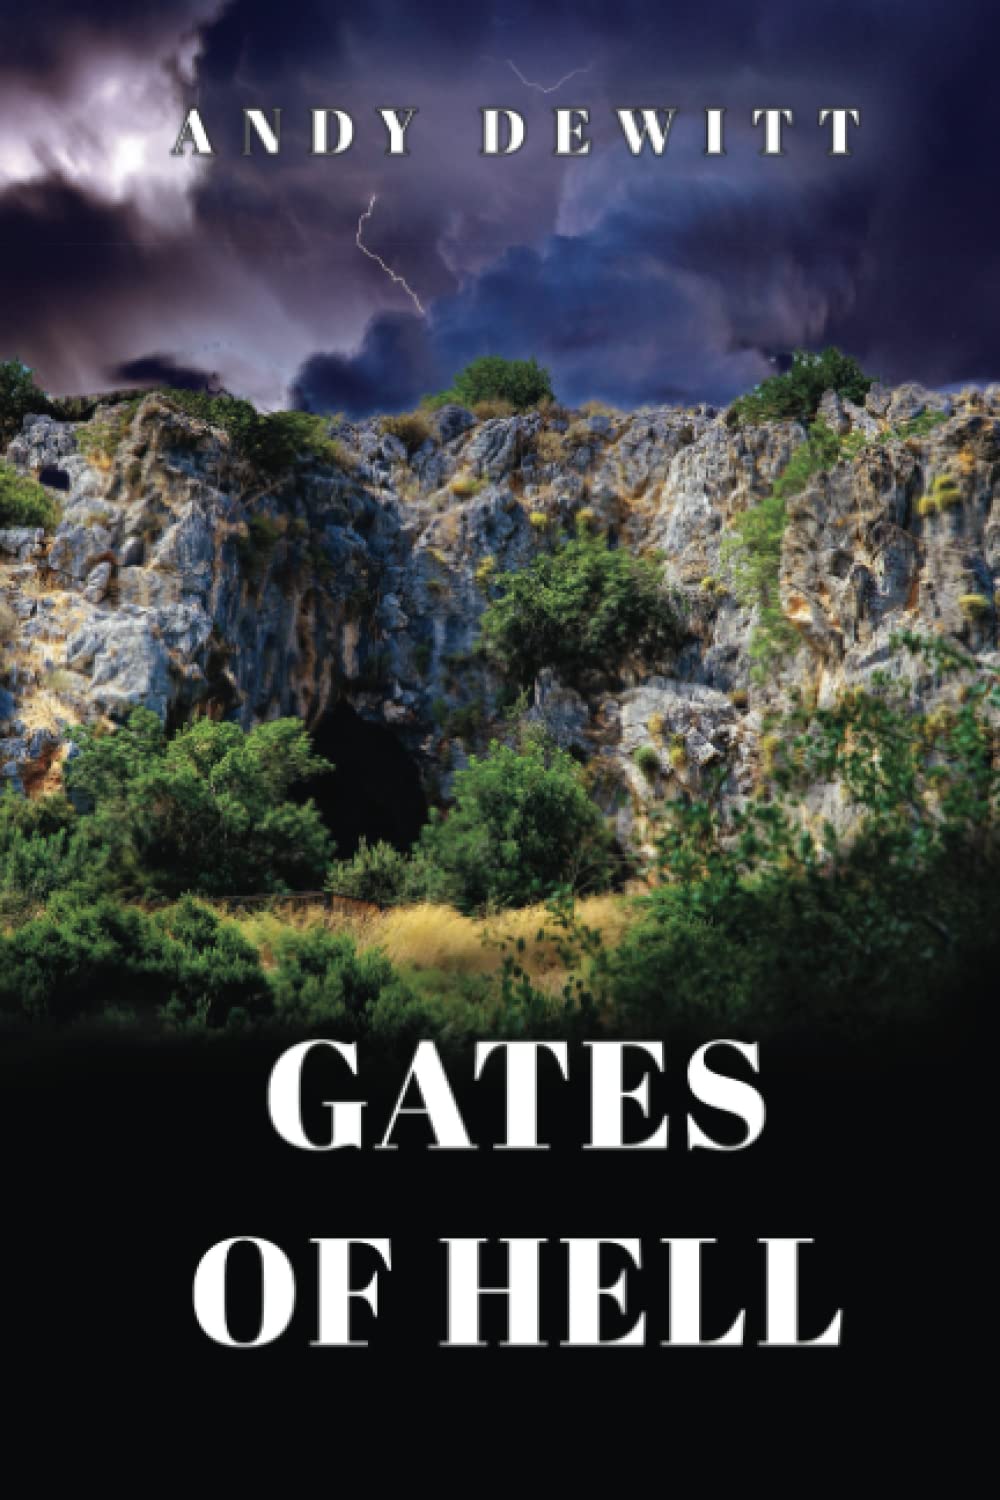 The Gates of Hell by Andy Dewitt